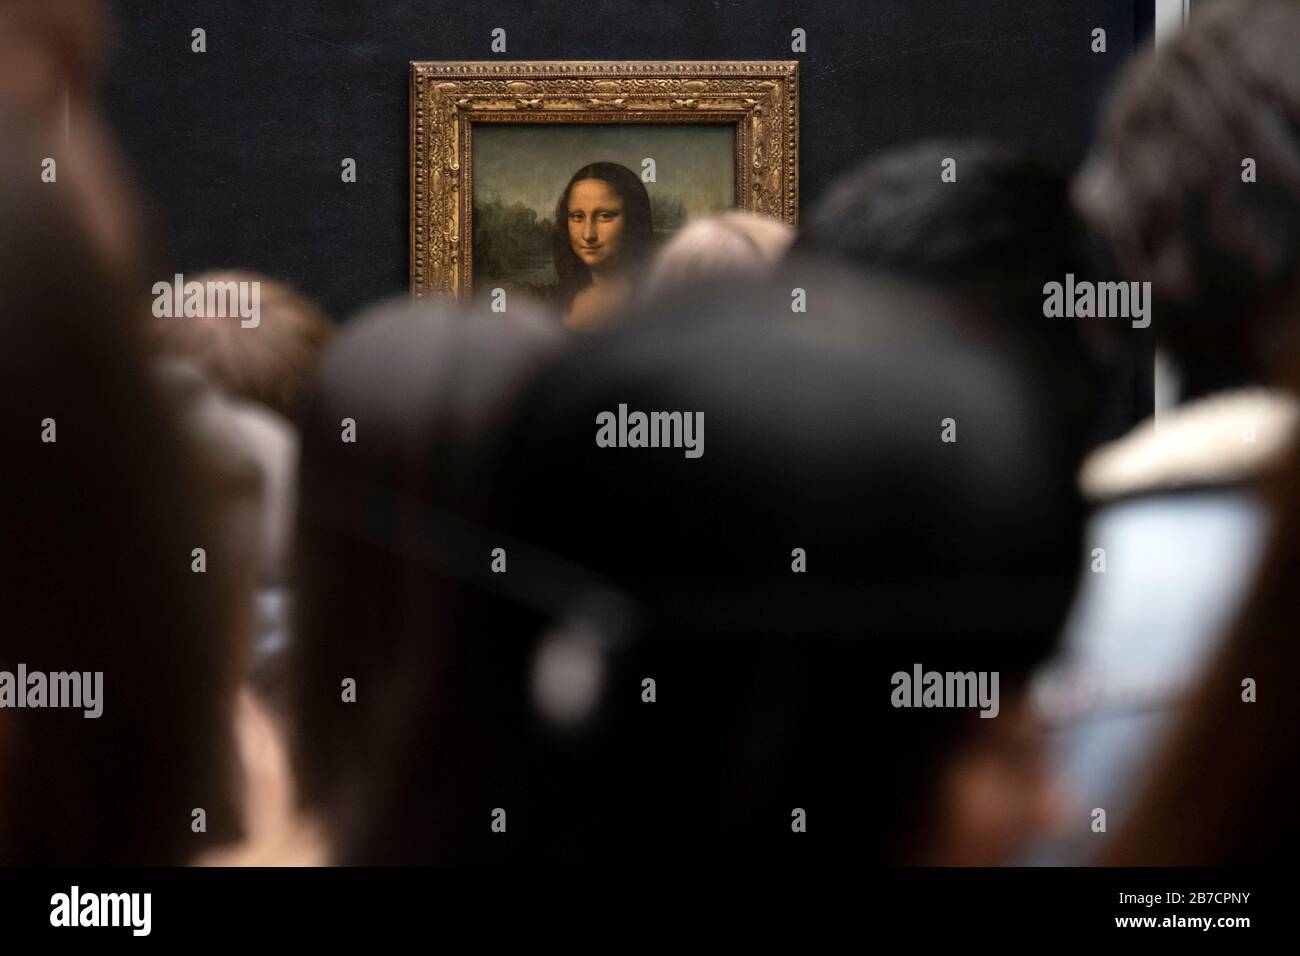 Crowd of tourists queuing to take pictures of the Mona Lisa painting by italian artist Leonardo da Vinci at the Louvre Museum in Paris, France, Europe Stock Photo